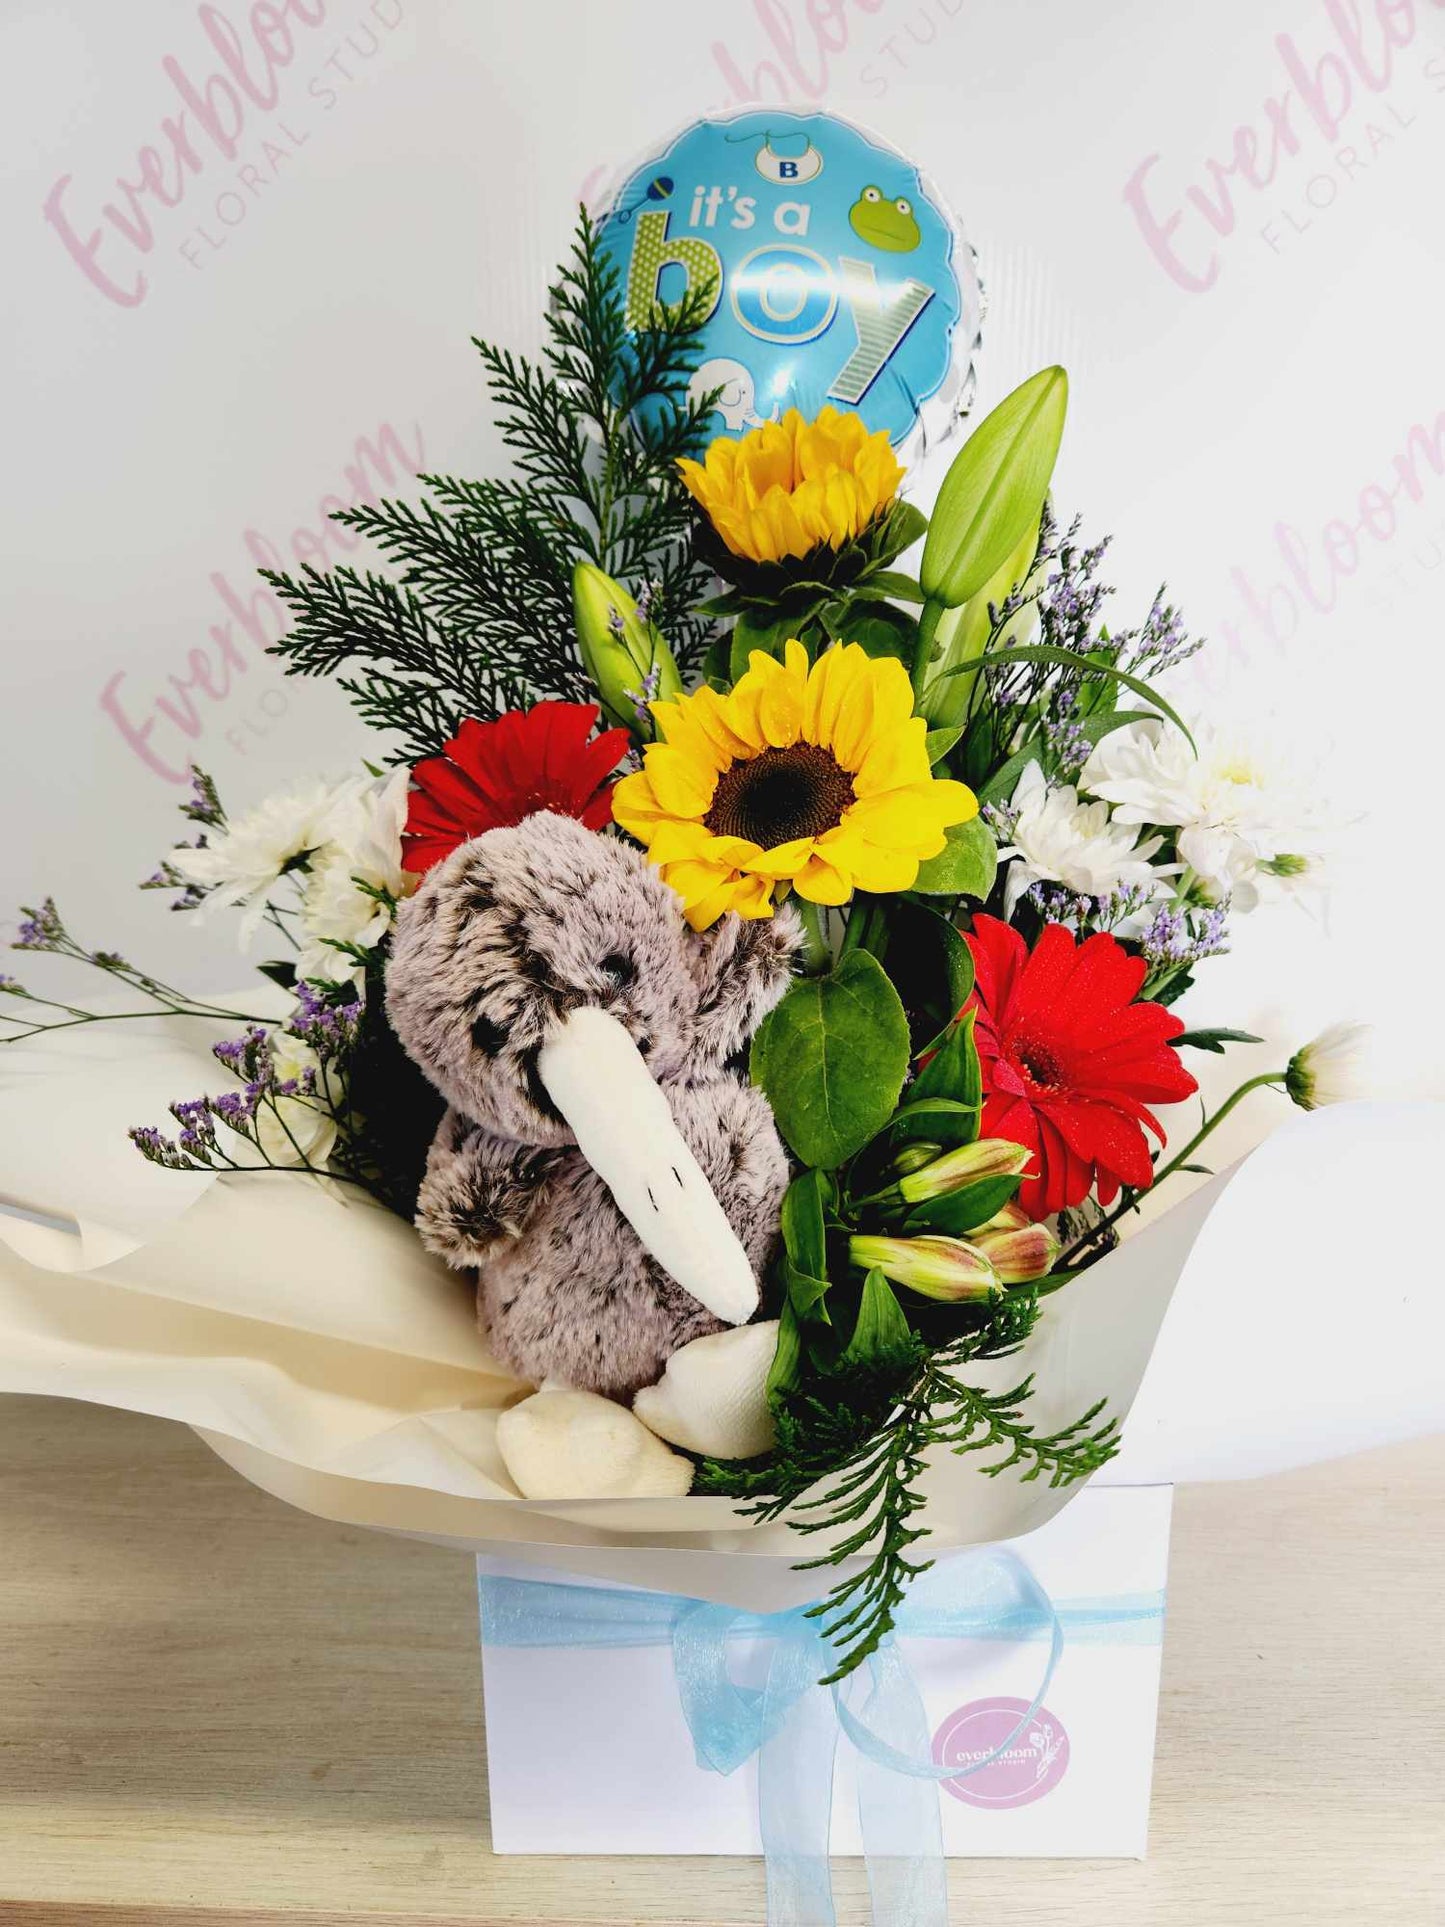 A happy bouquets of sunflowers, this bunch with bring happiness and a bit of sunshine to anyone's day. Send a bouquets of sunflowers today to that someone special in your life. Same day flower delivery from our everbloom floral studio in the sunny Mount Maunganui